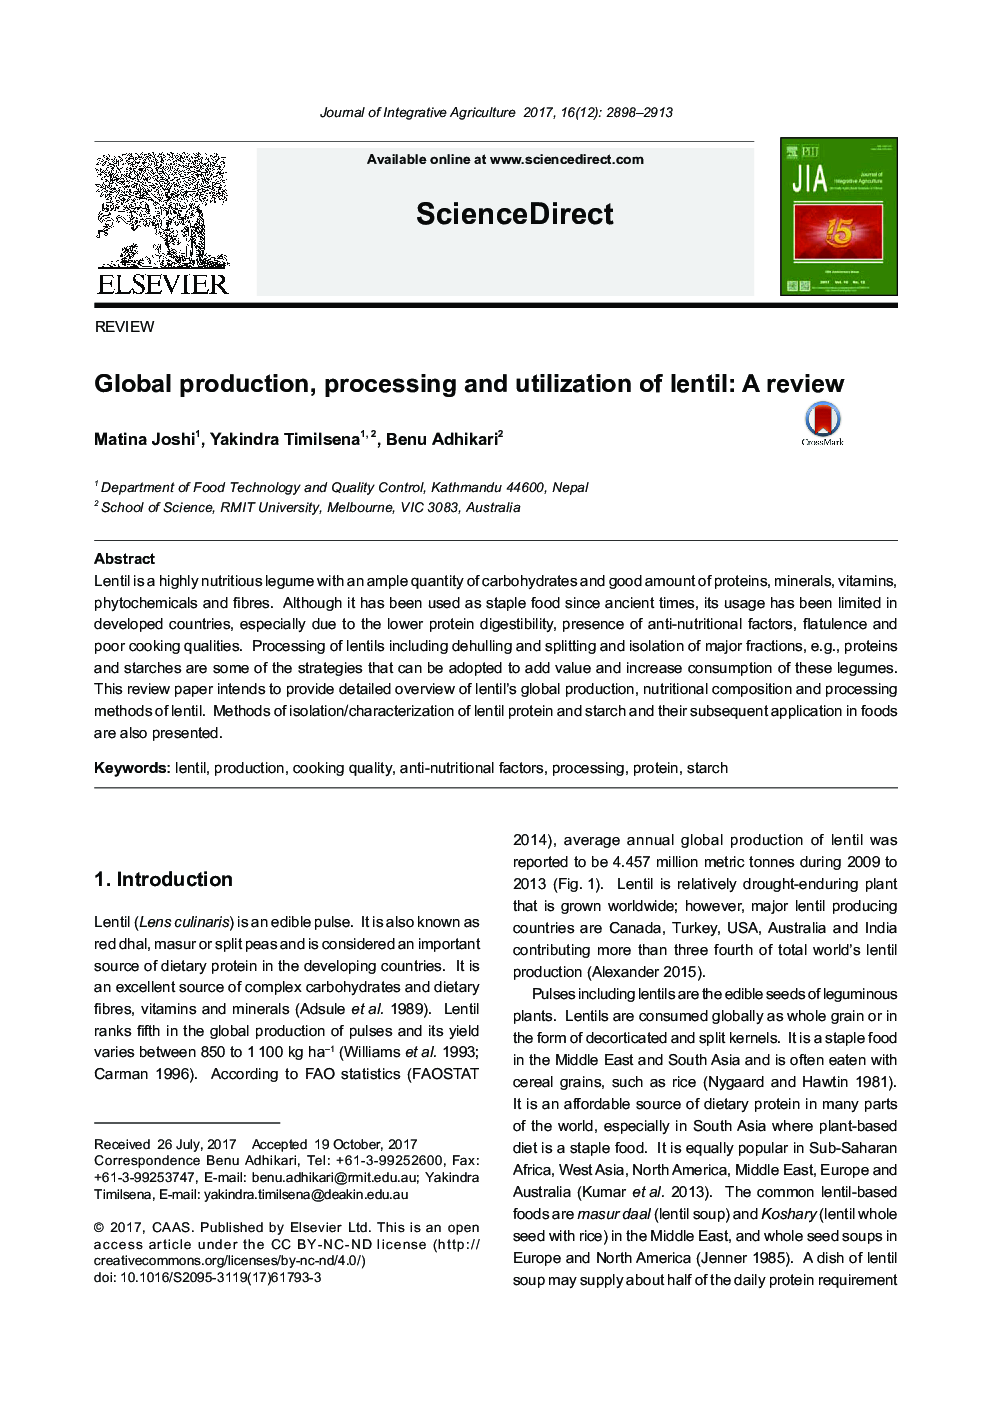 Global production, processing and utilization of lentil: A review